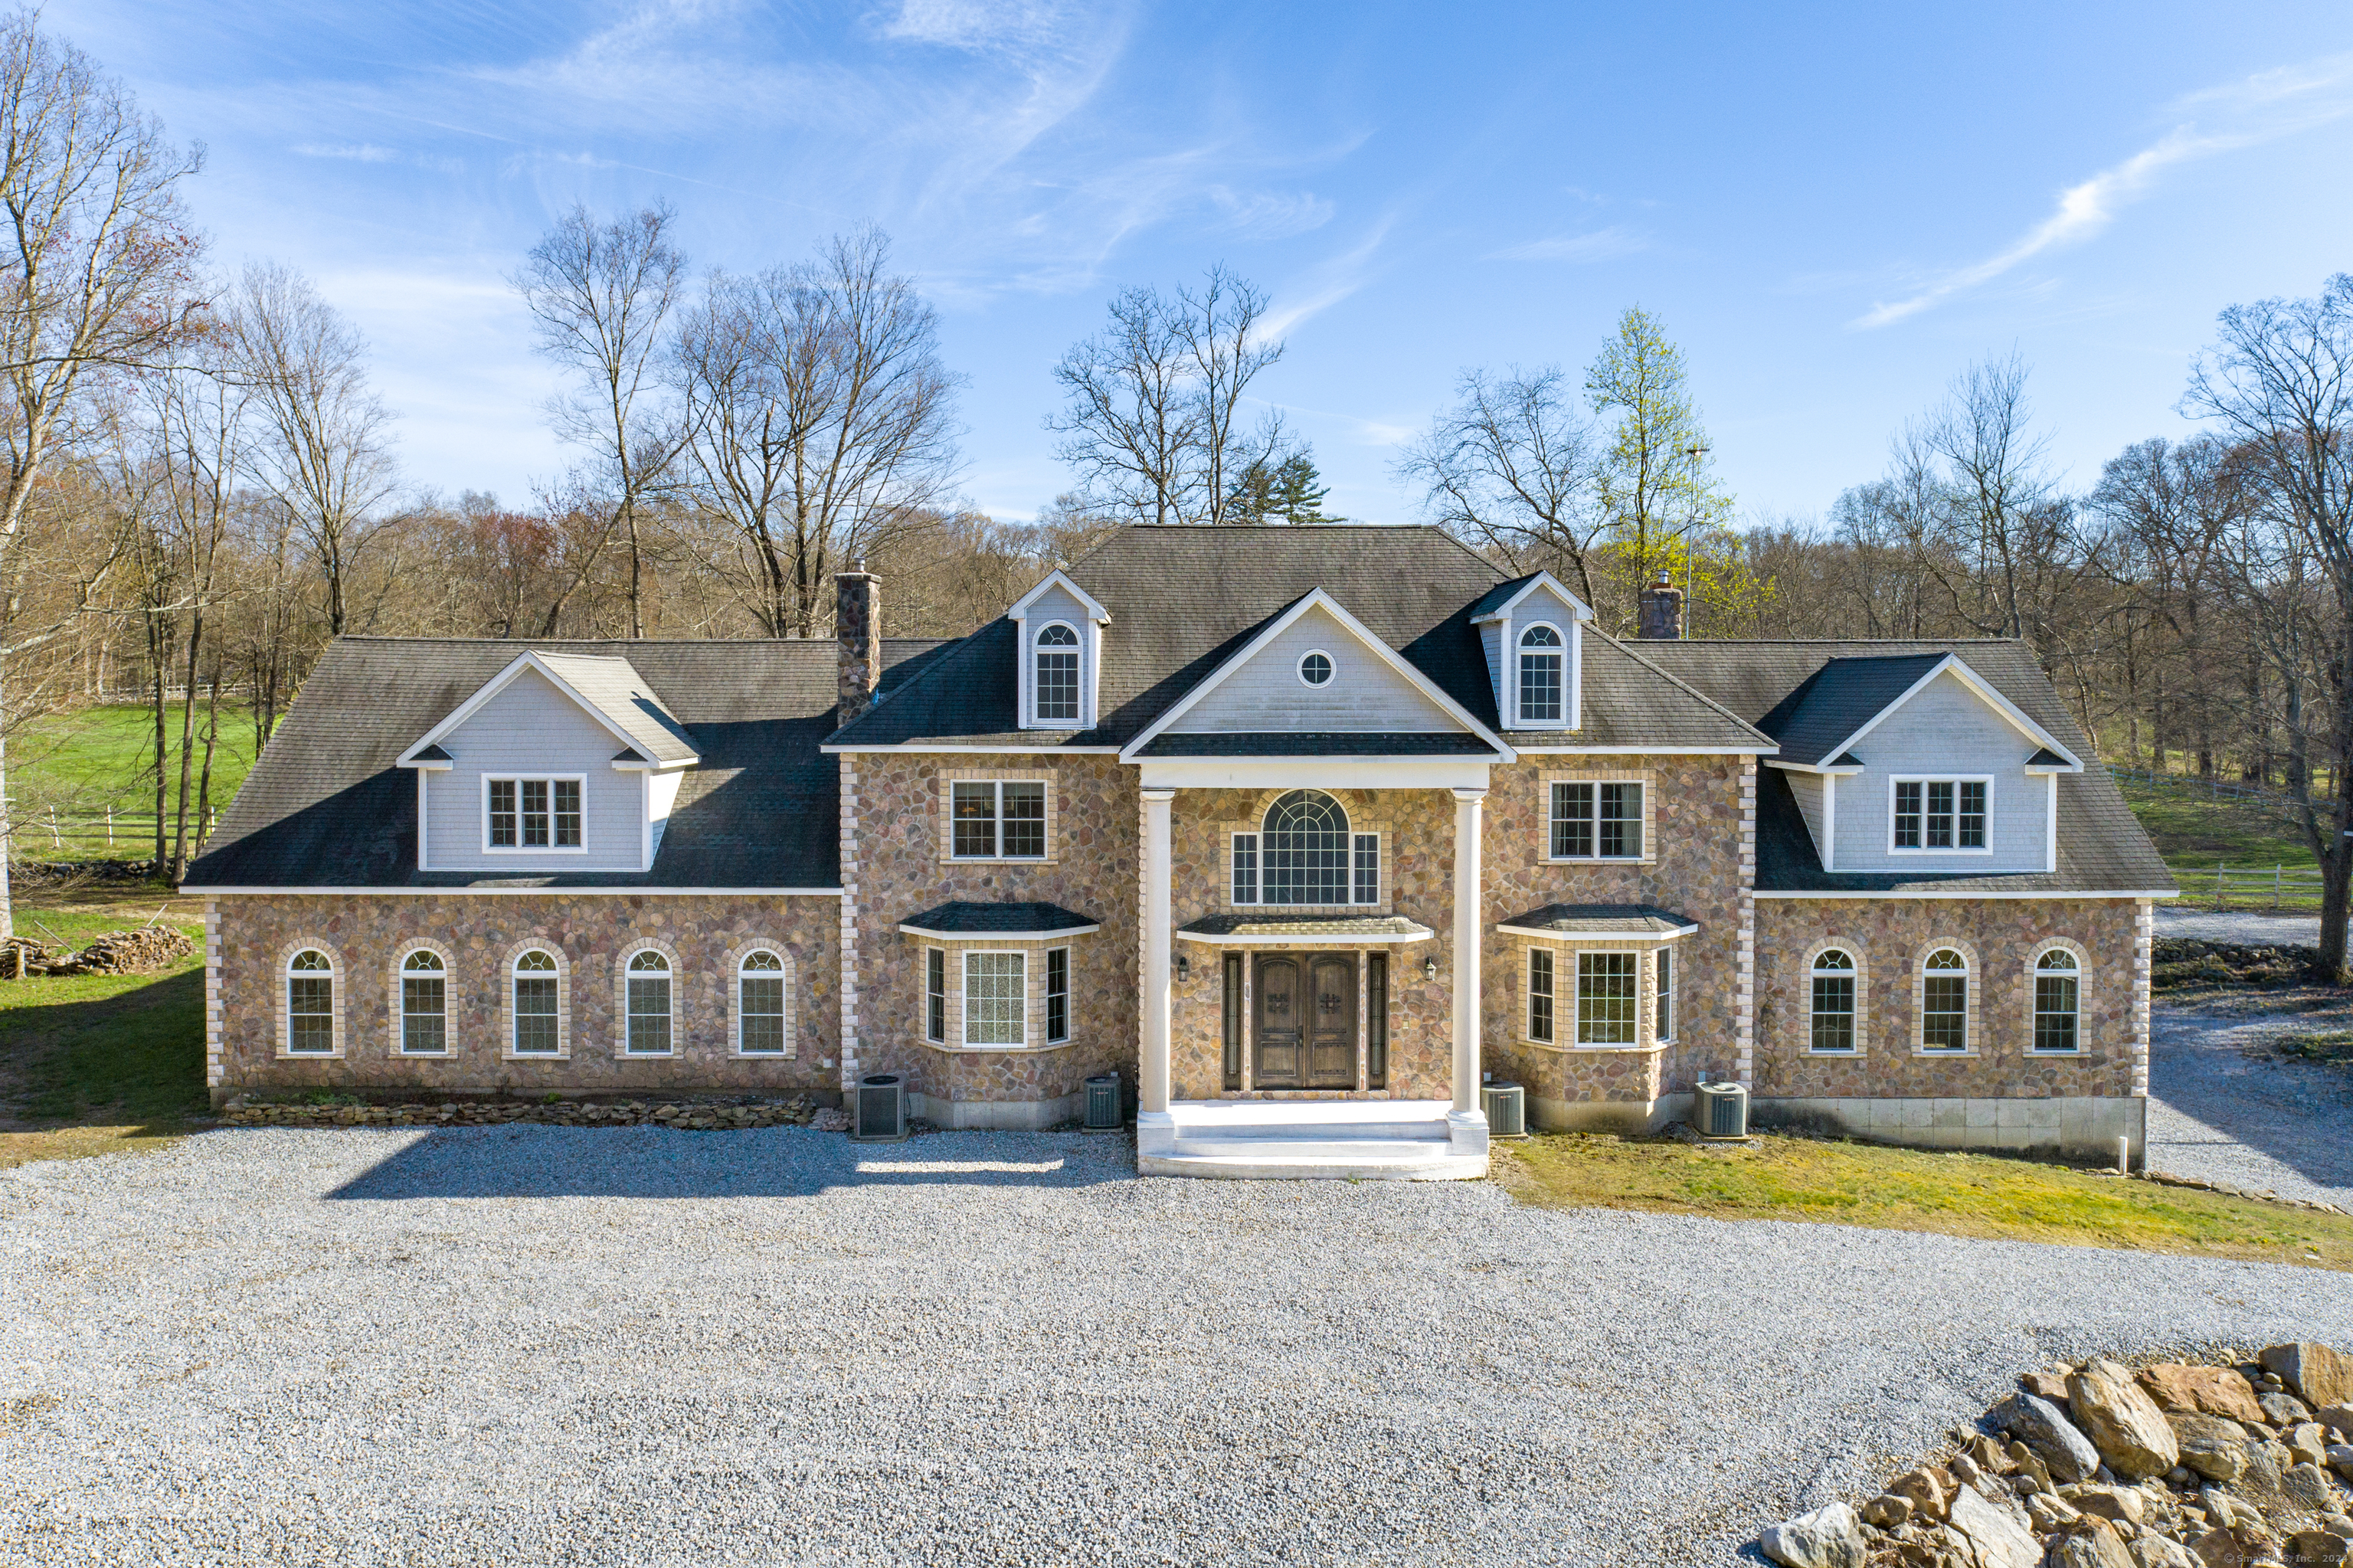 53 Great Hillwood Road, East Haddam, Connecticut - 5 Bedrooms  
4 Bathrooms  
13 Rooms - 